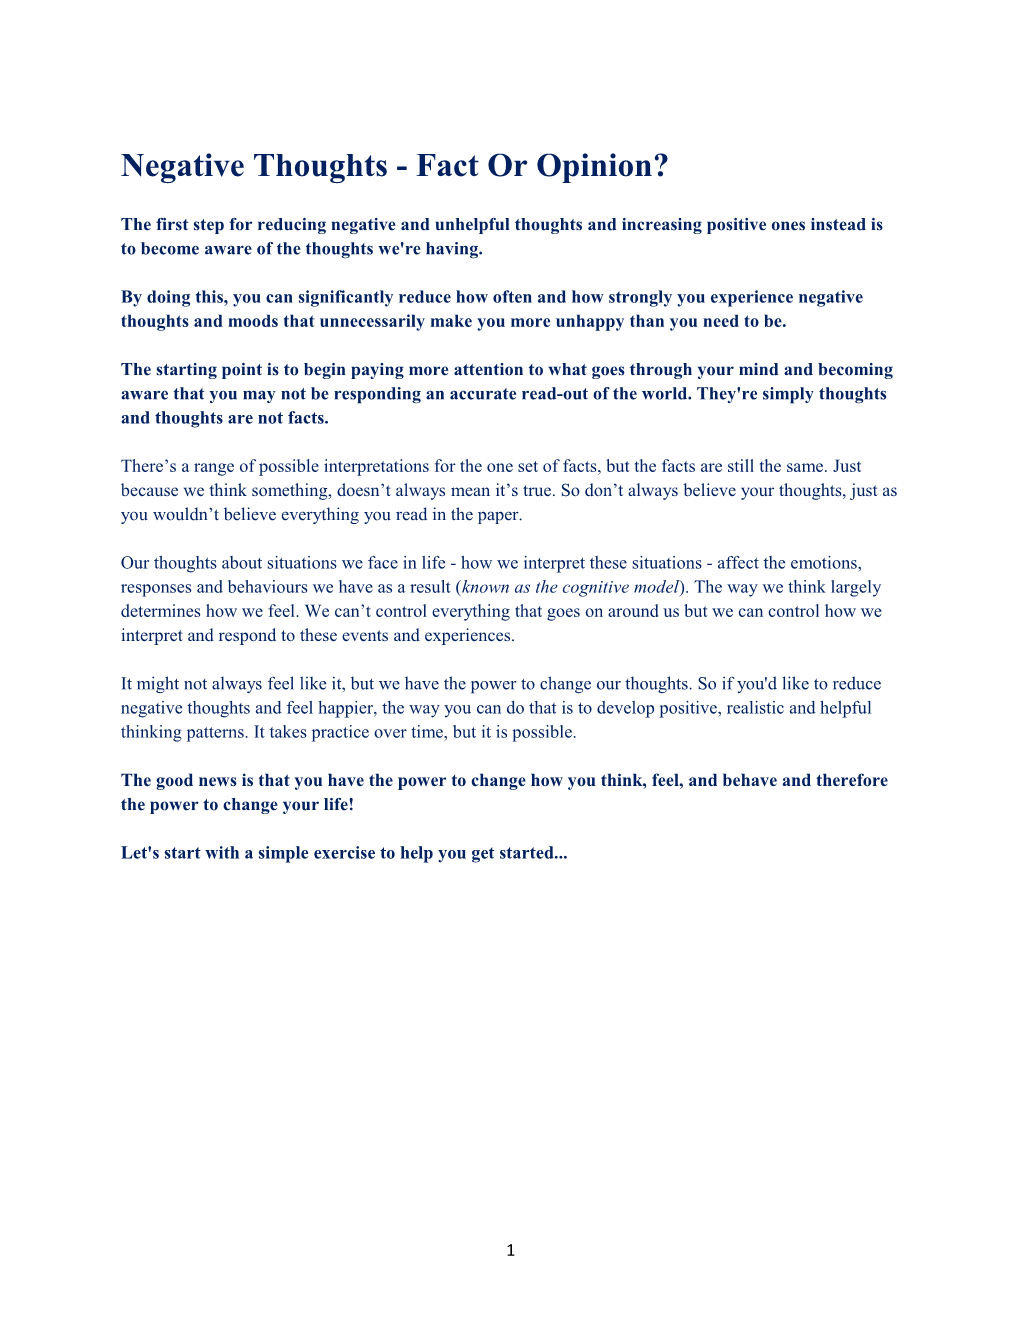 Negative Thoughts - Fact Or Opinion?